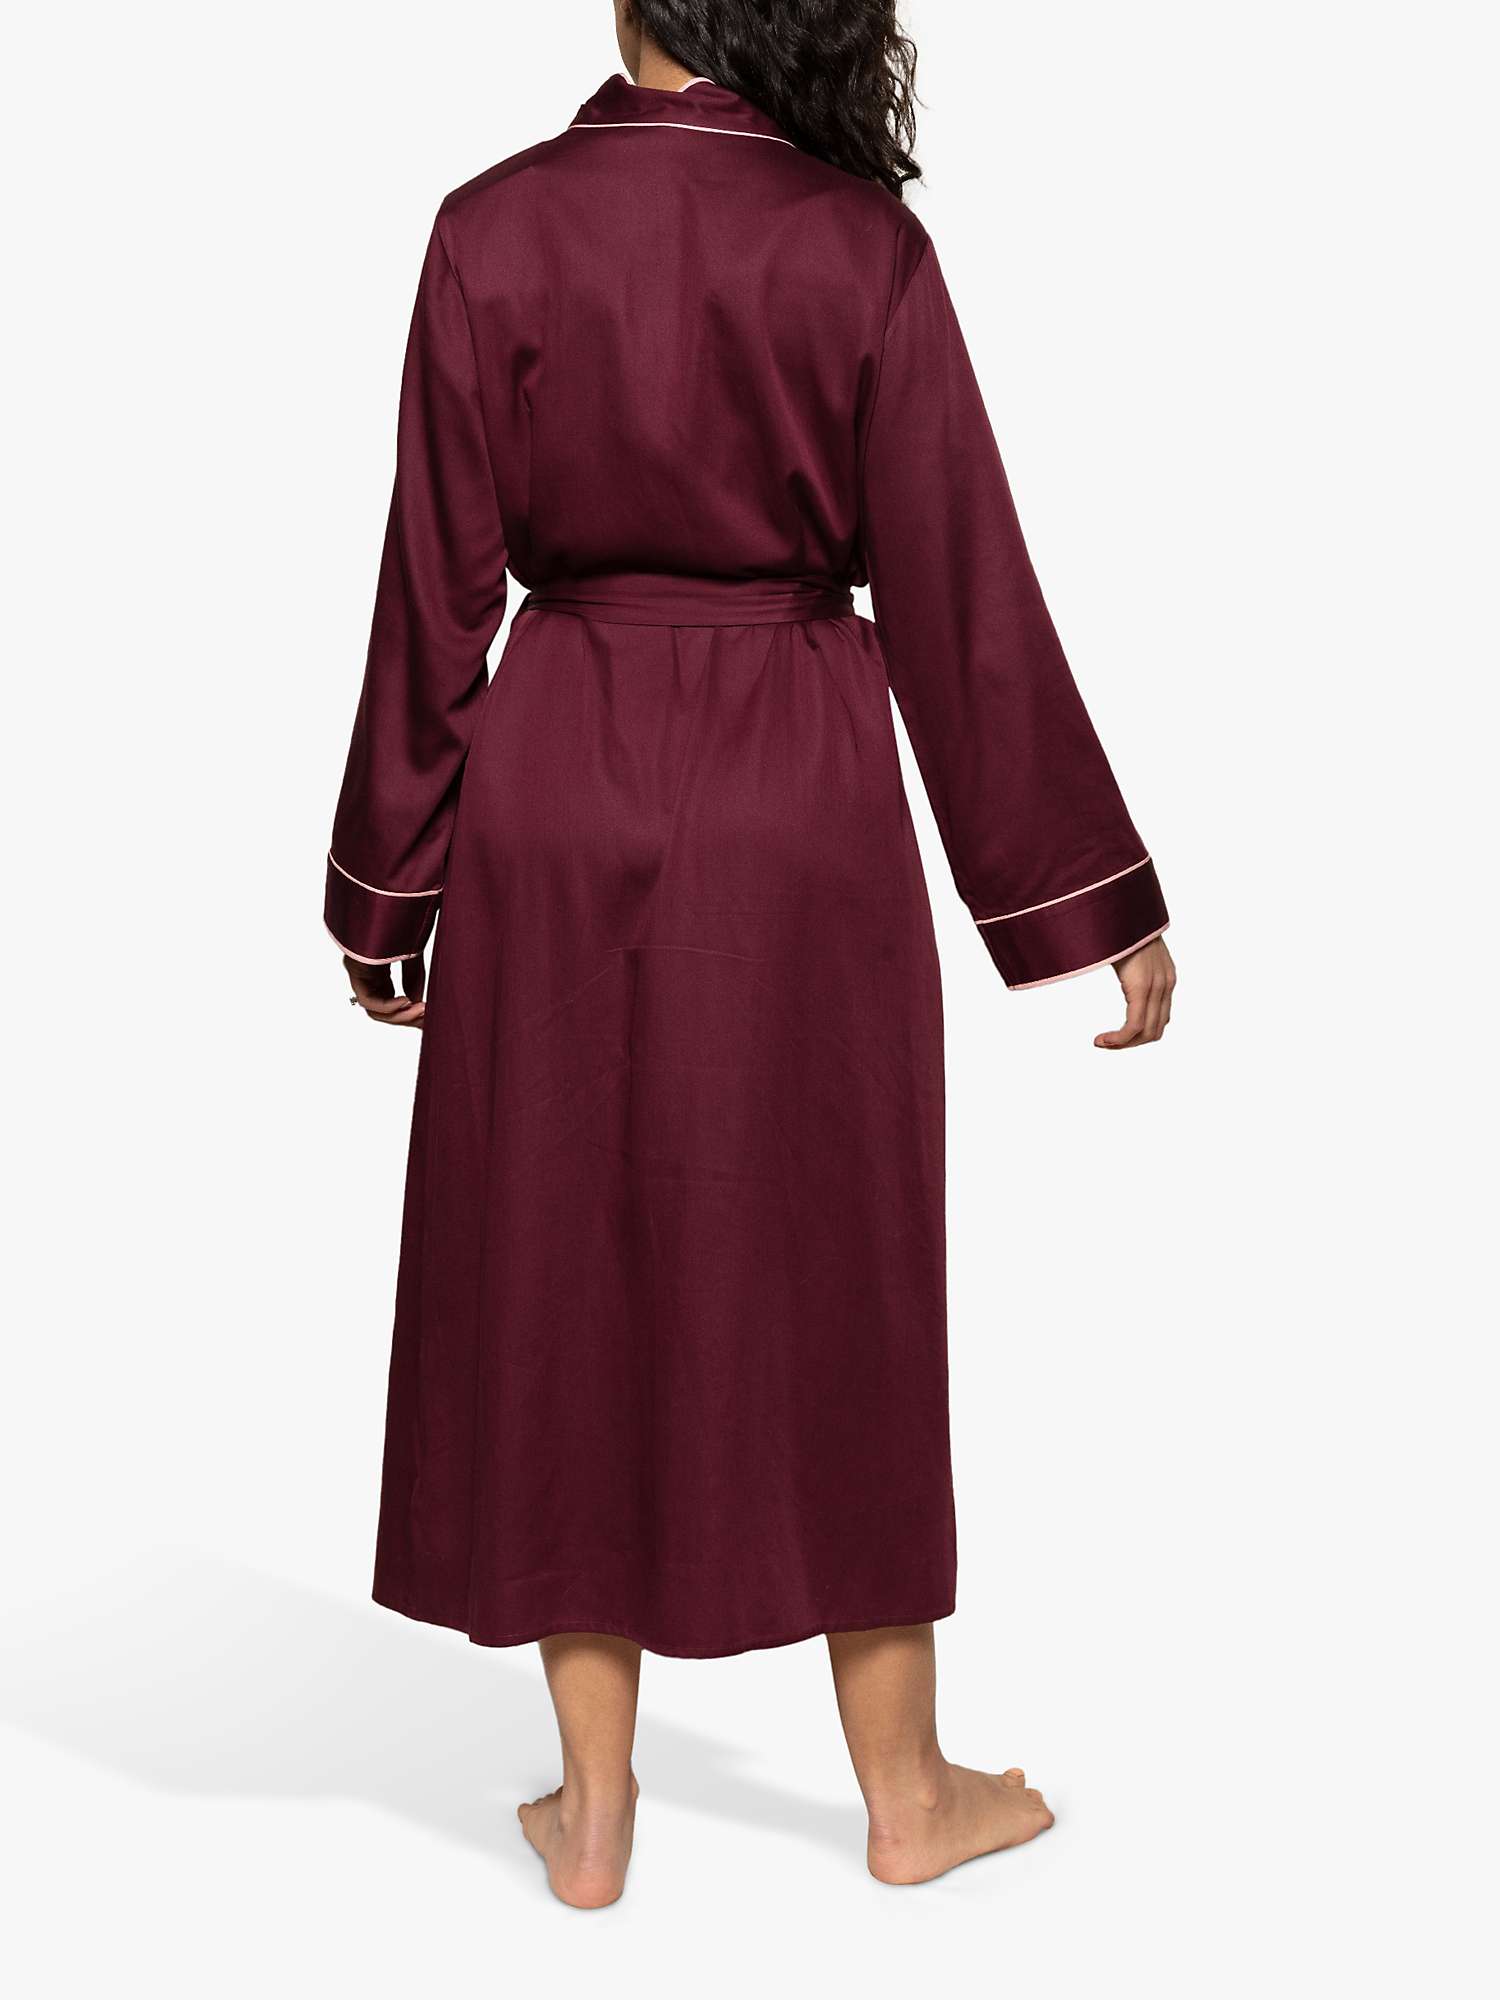 Buy Fable & Eve Piccadilly Long Robe, Burgundy Online at johnlewis.com